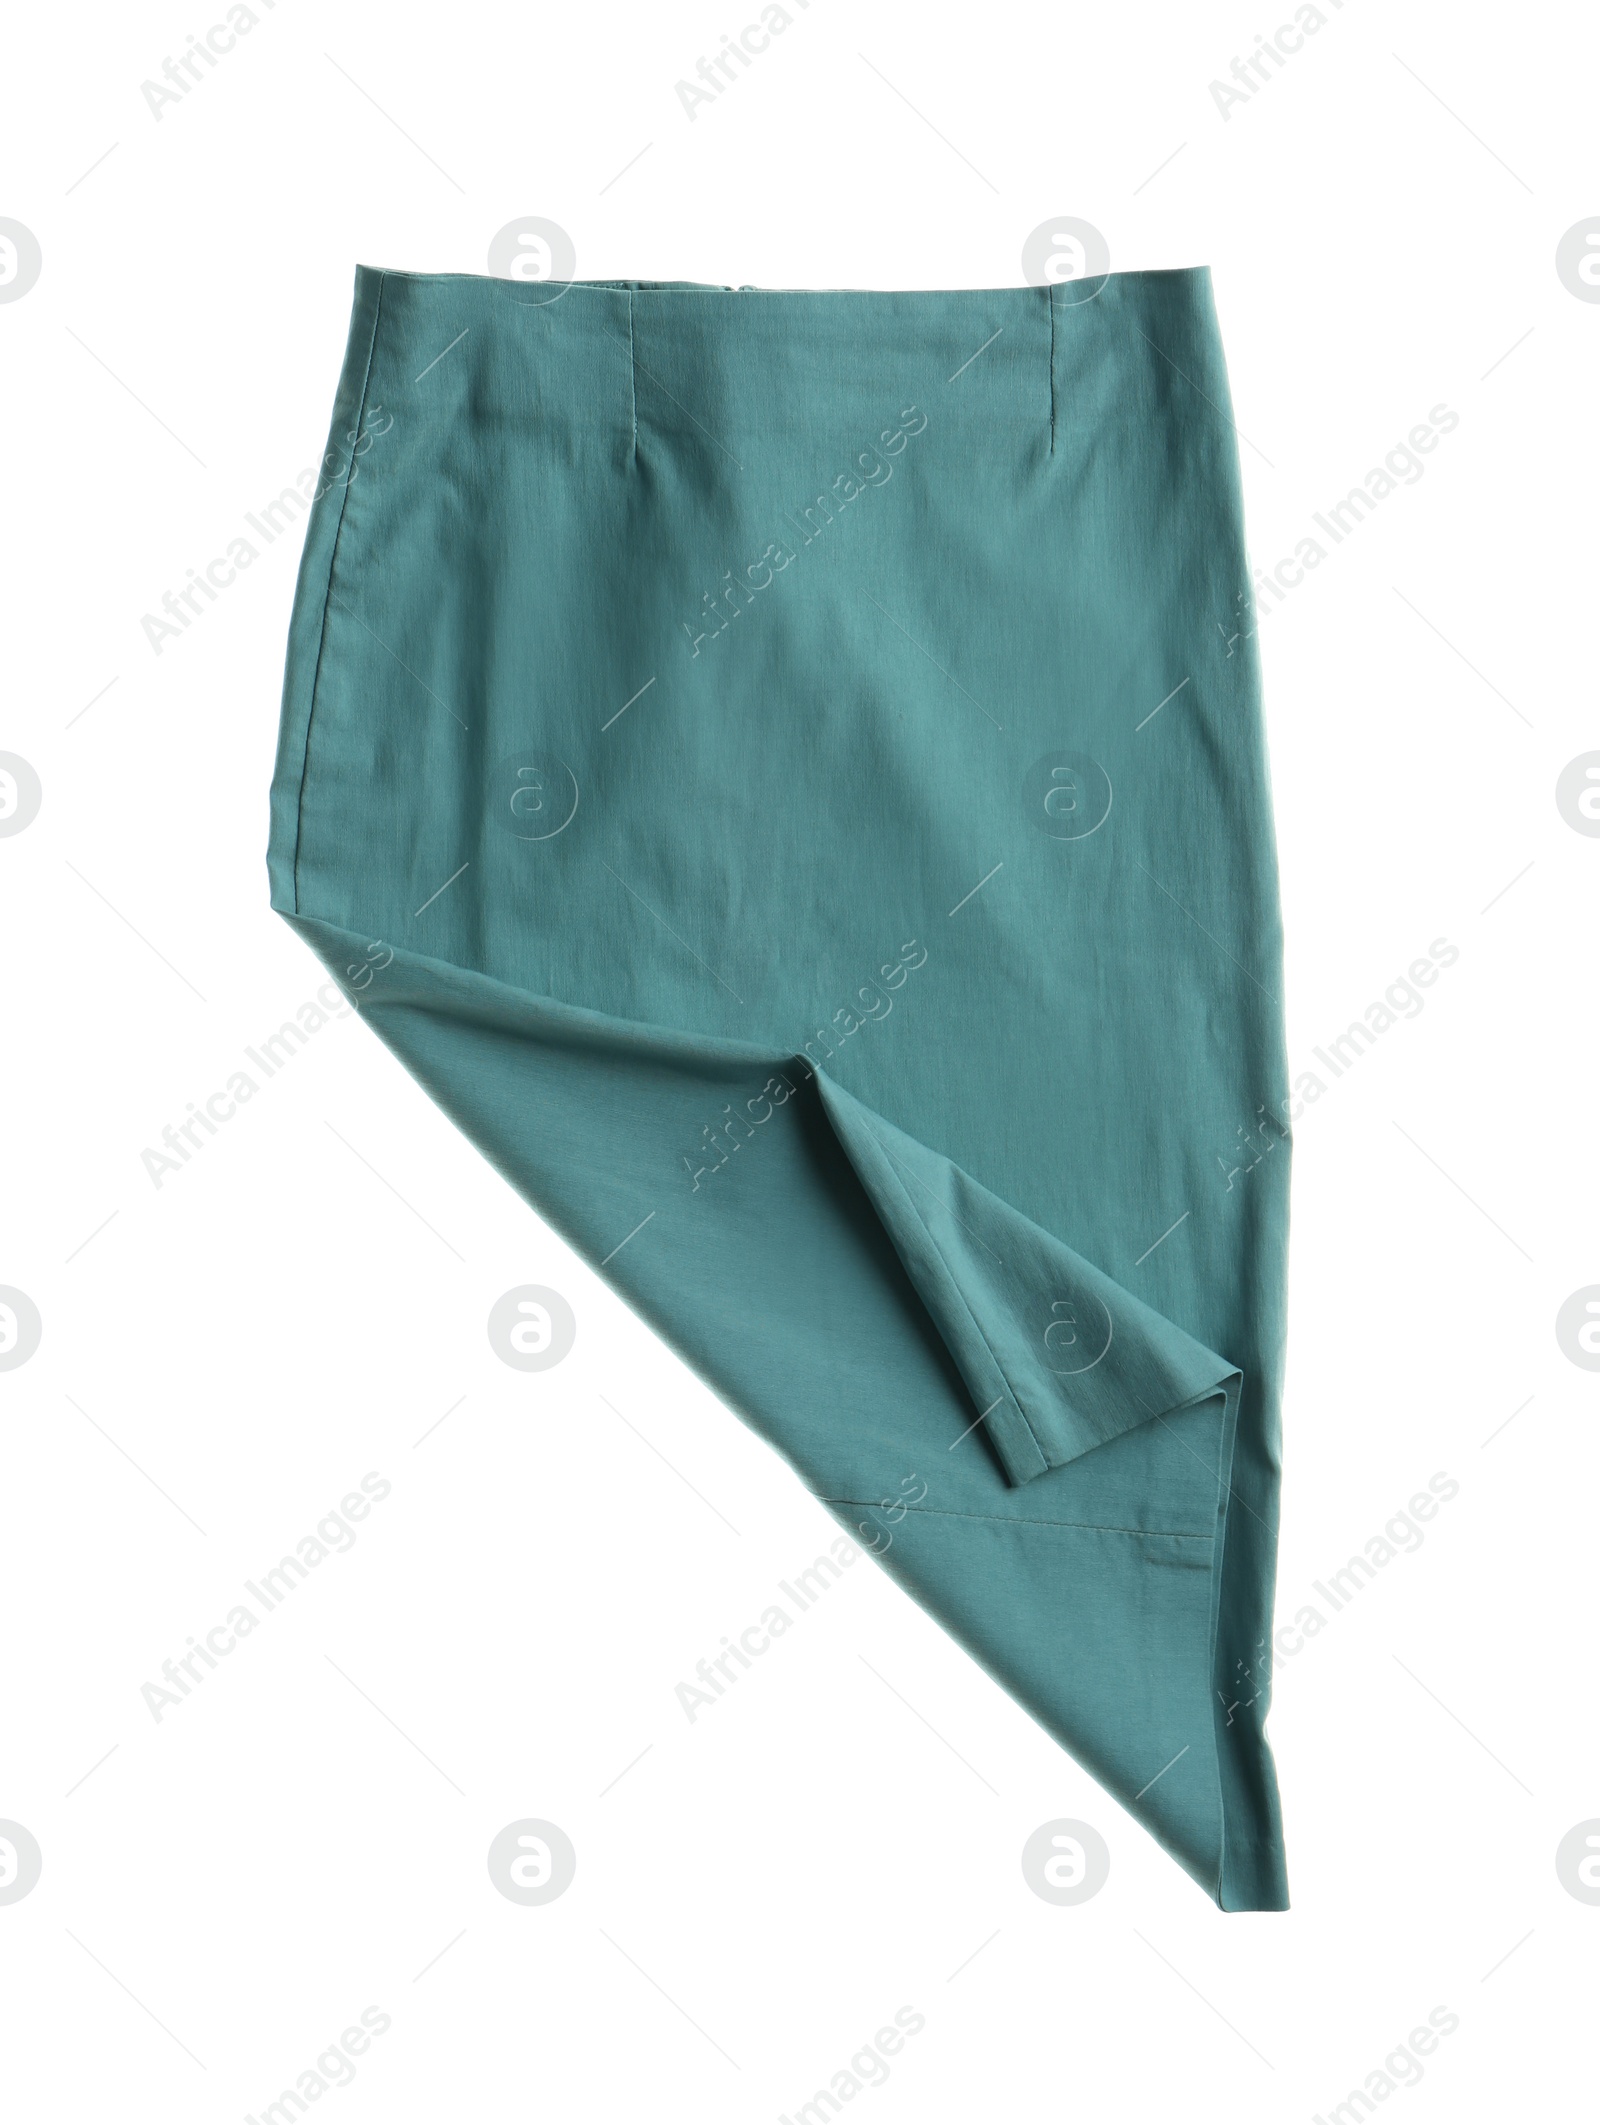 Photo of Rumpled blue skirt isolated on white. Messy clothes